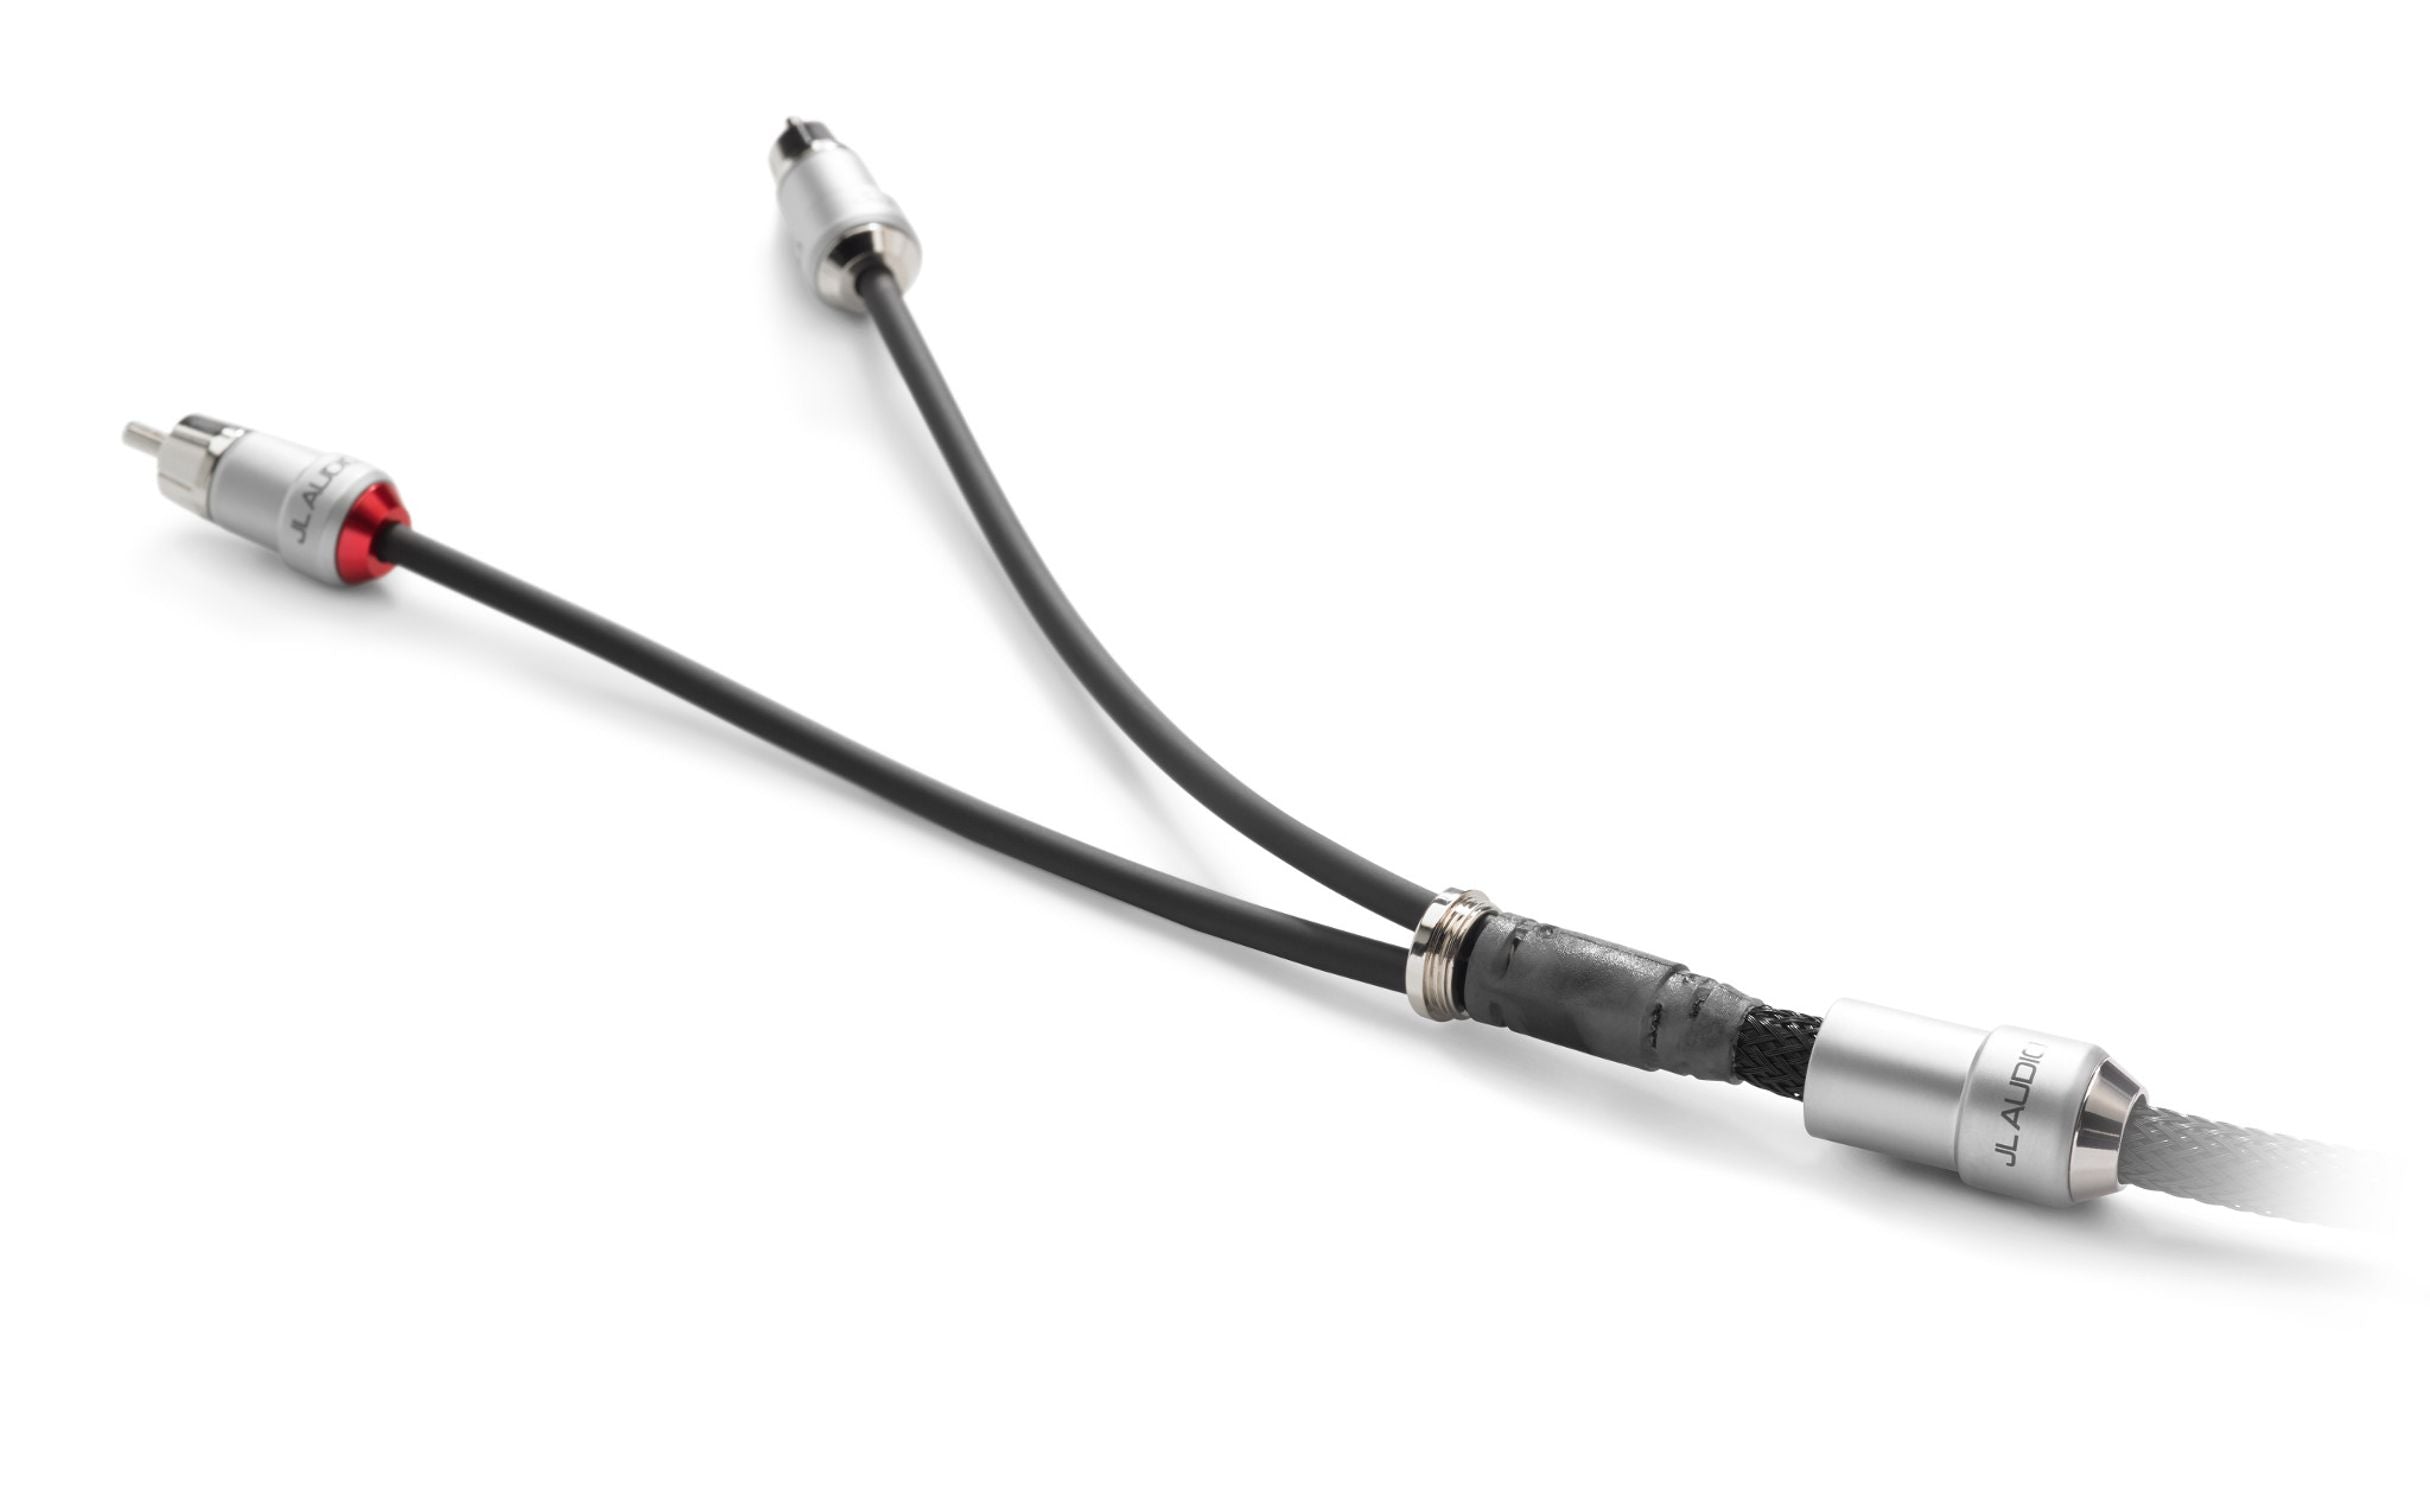 XE-BLKAIC2 Audio Interconnect showing strain-relief on cable splitter